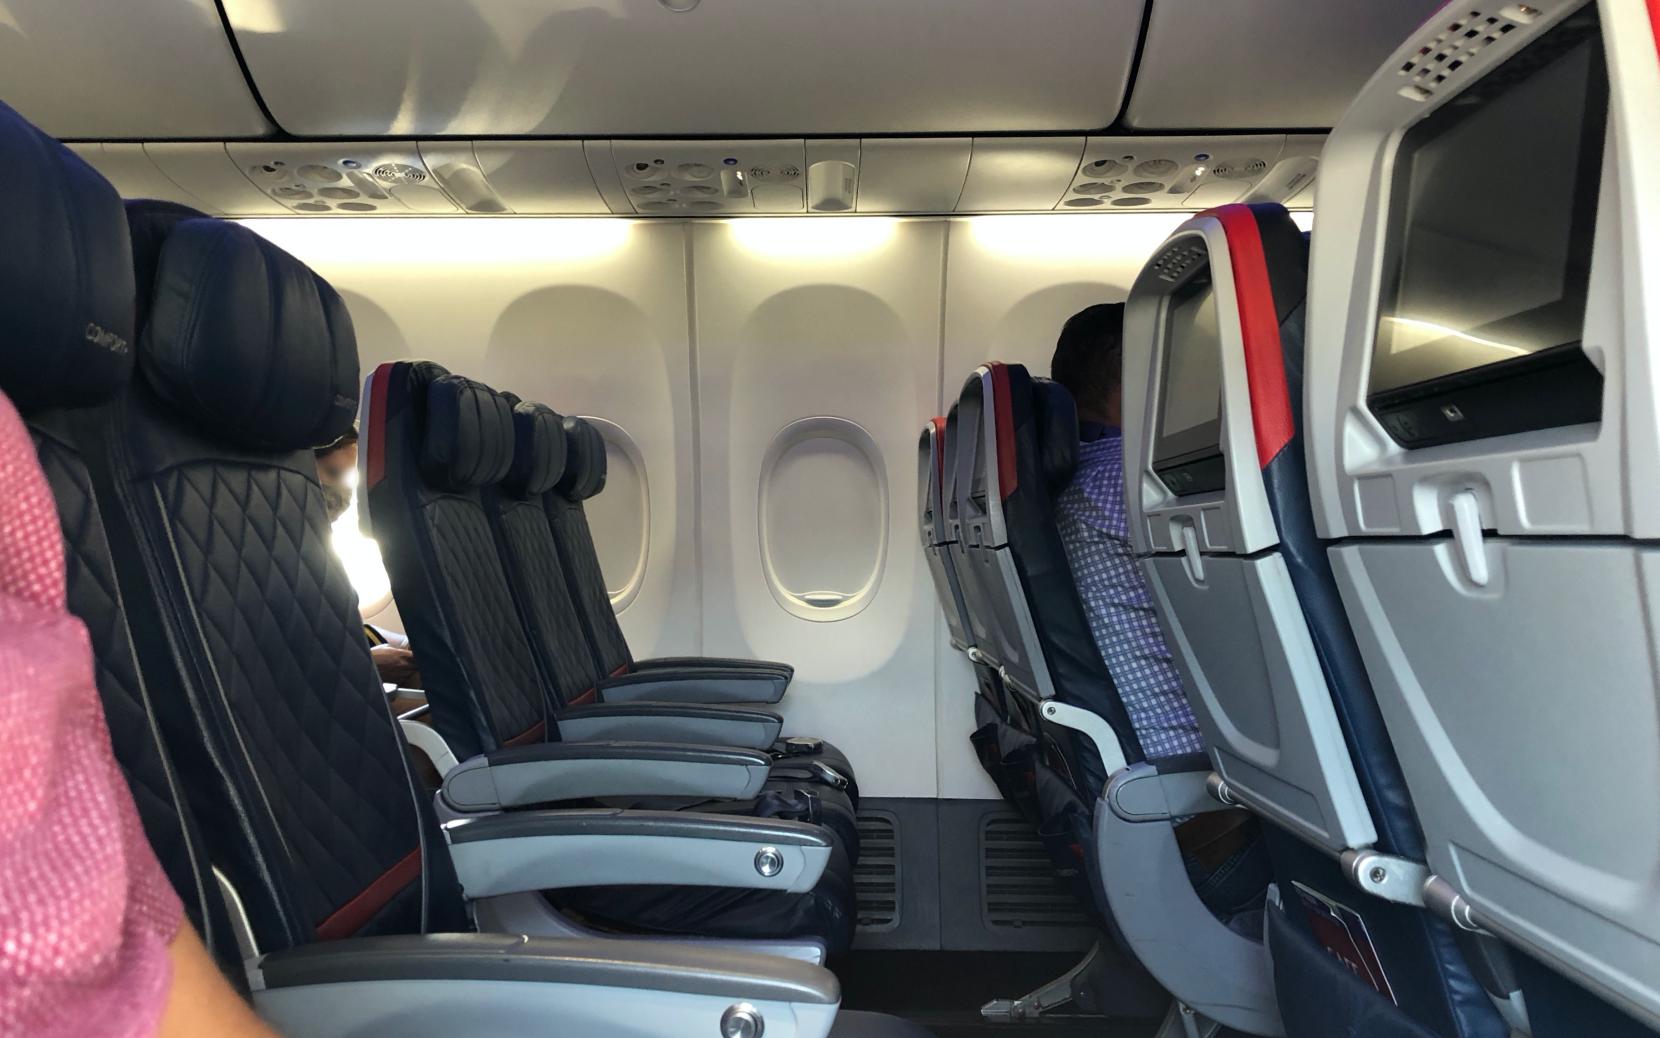 A Boeing 737 row, with all six seats empty except for the one Paul is sitting in.